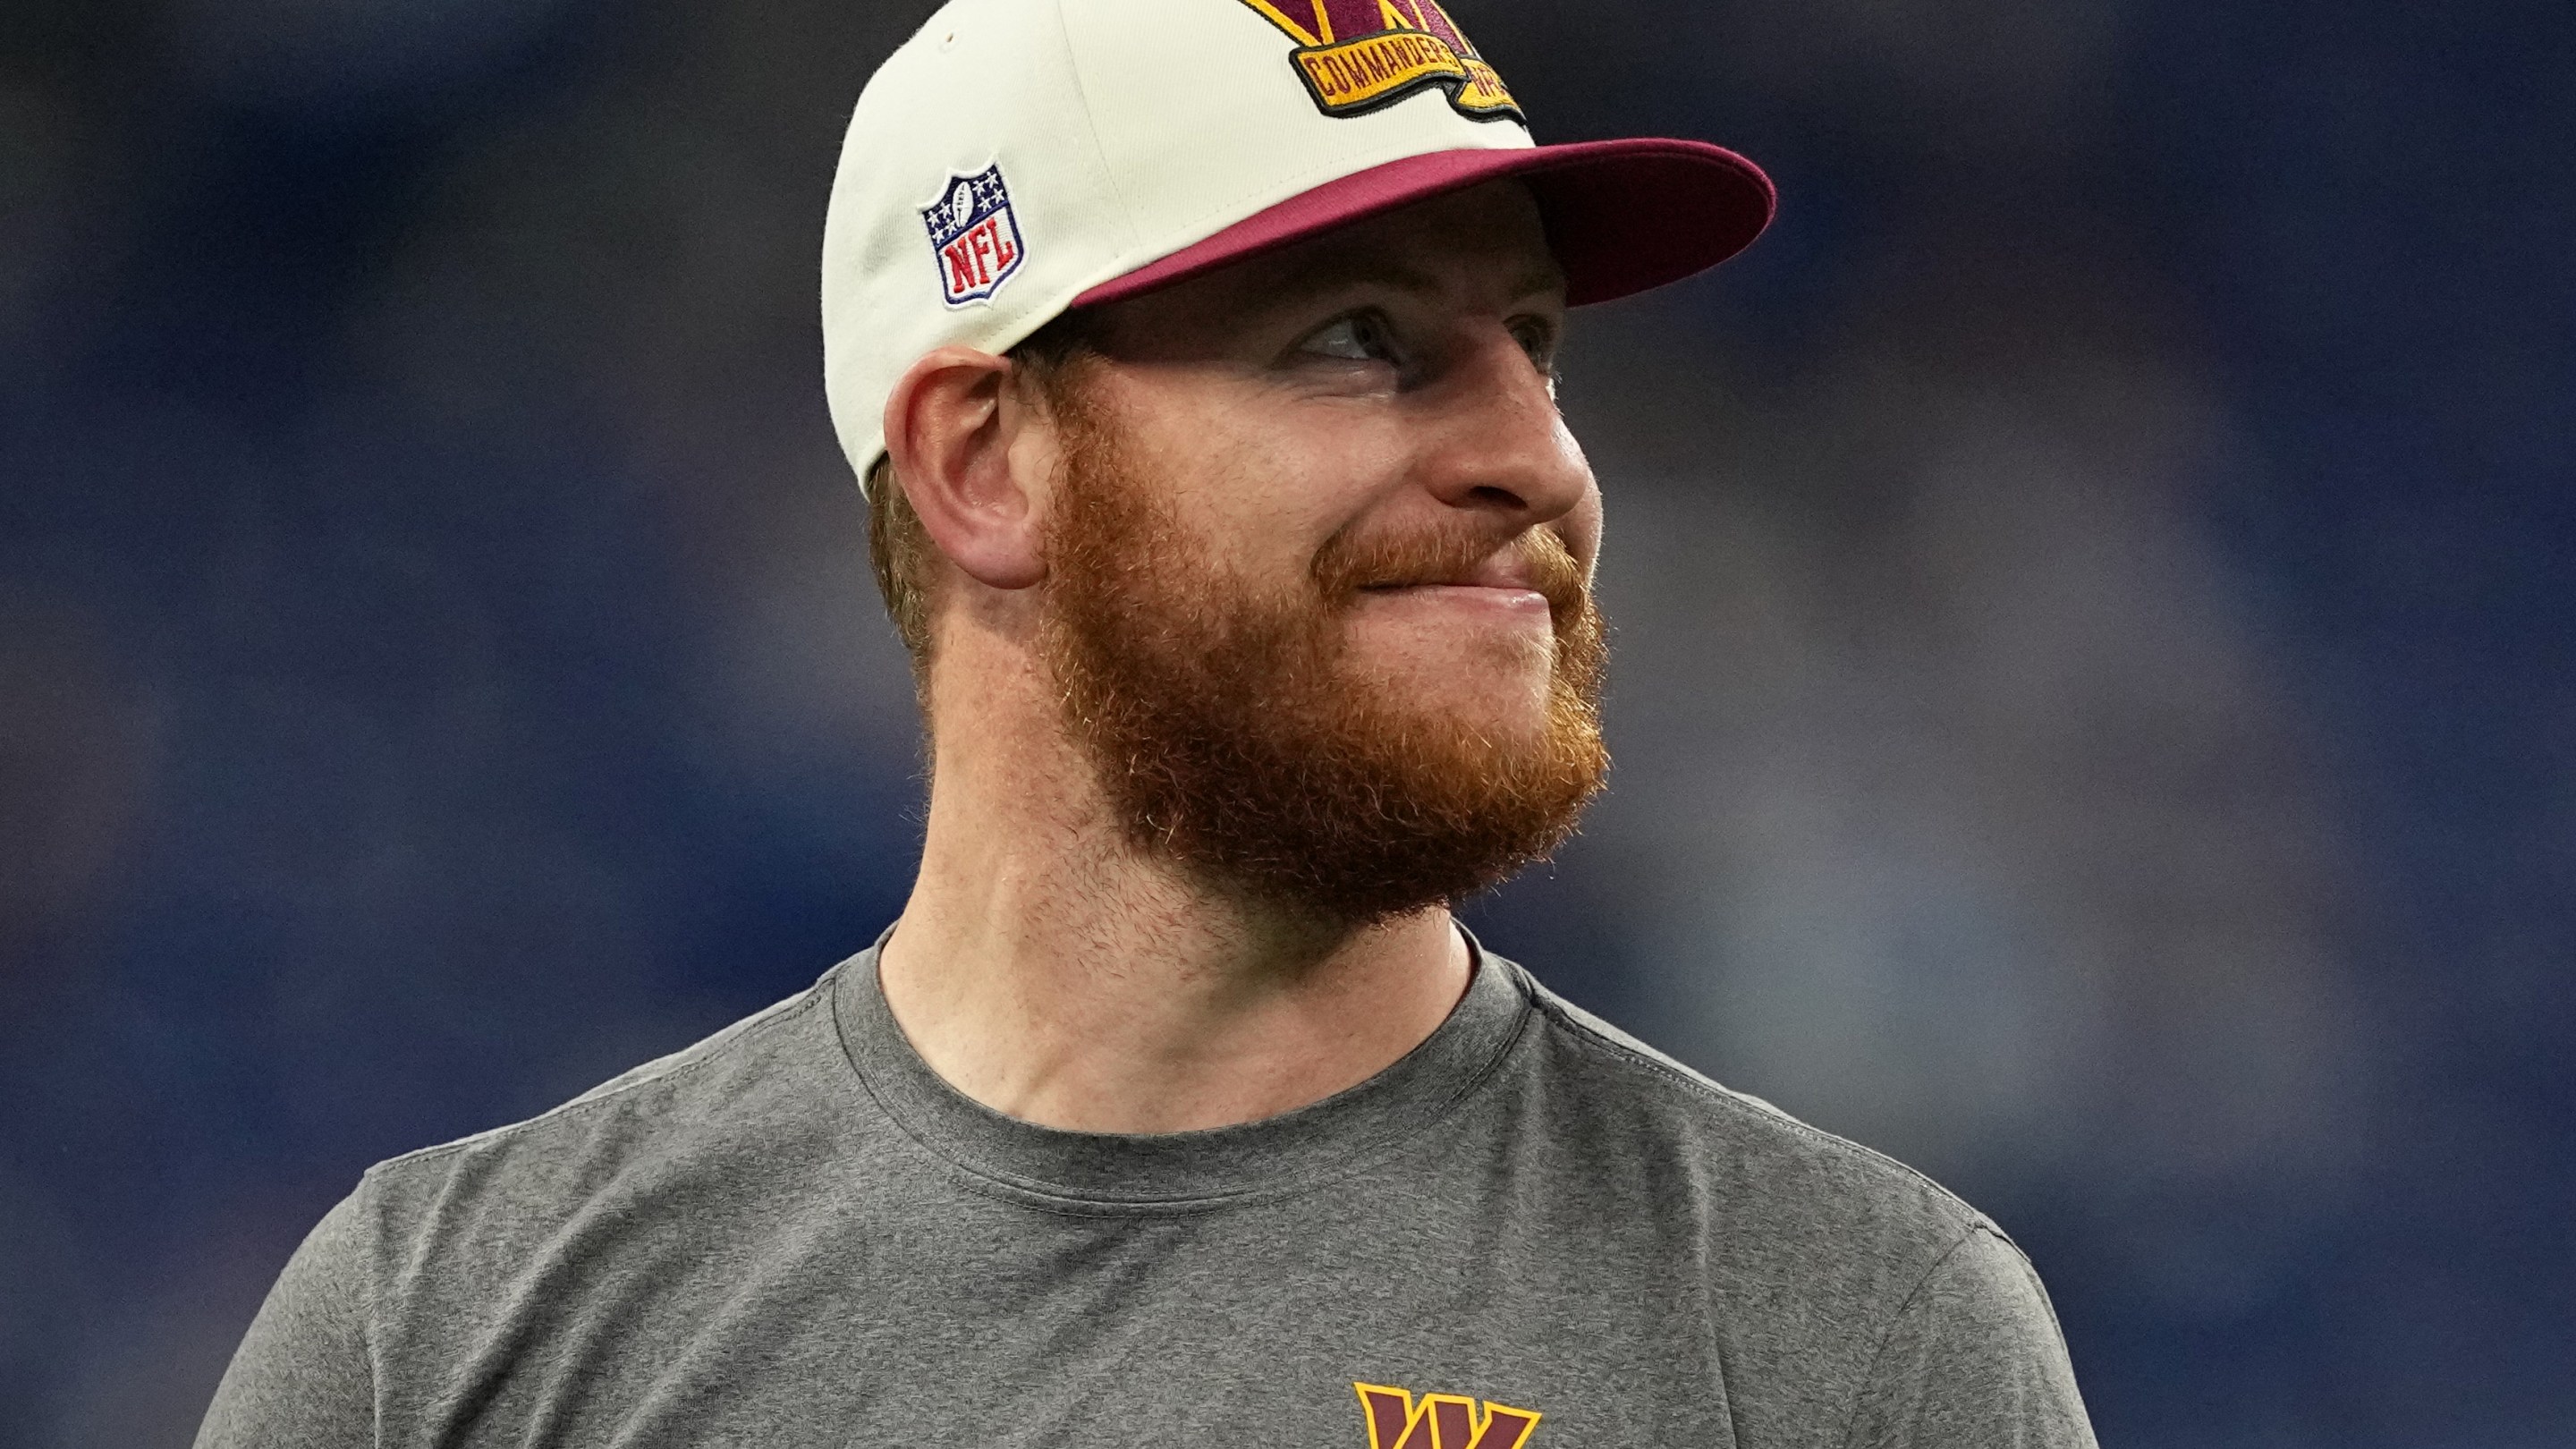 Carson Wentz grinning weirdly on the field before a Washington Commanders game in 2022.